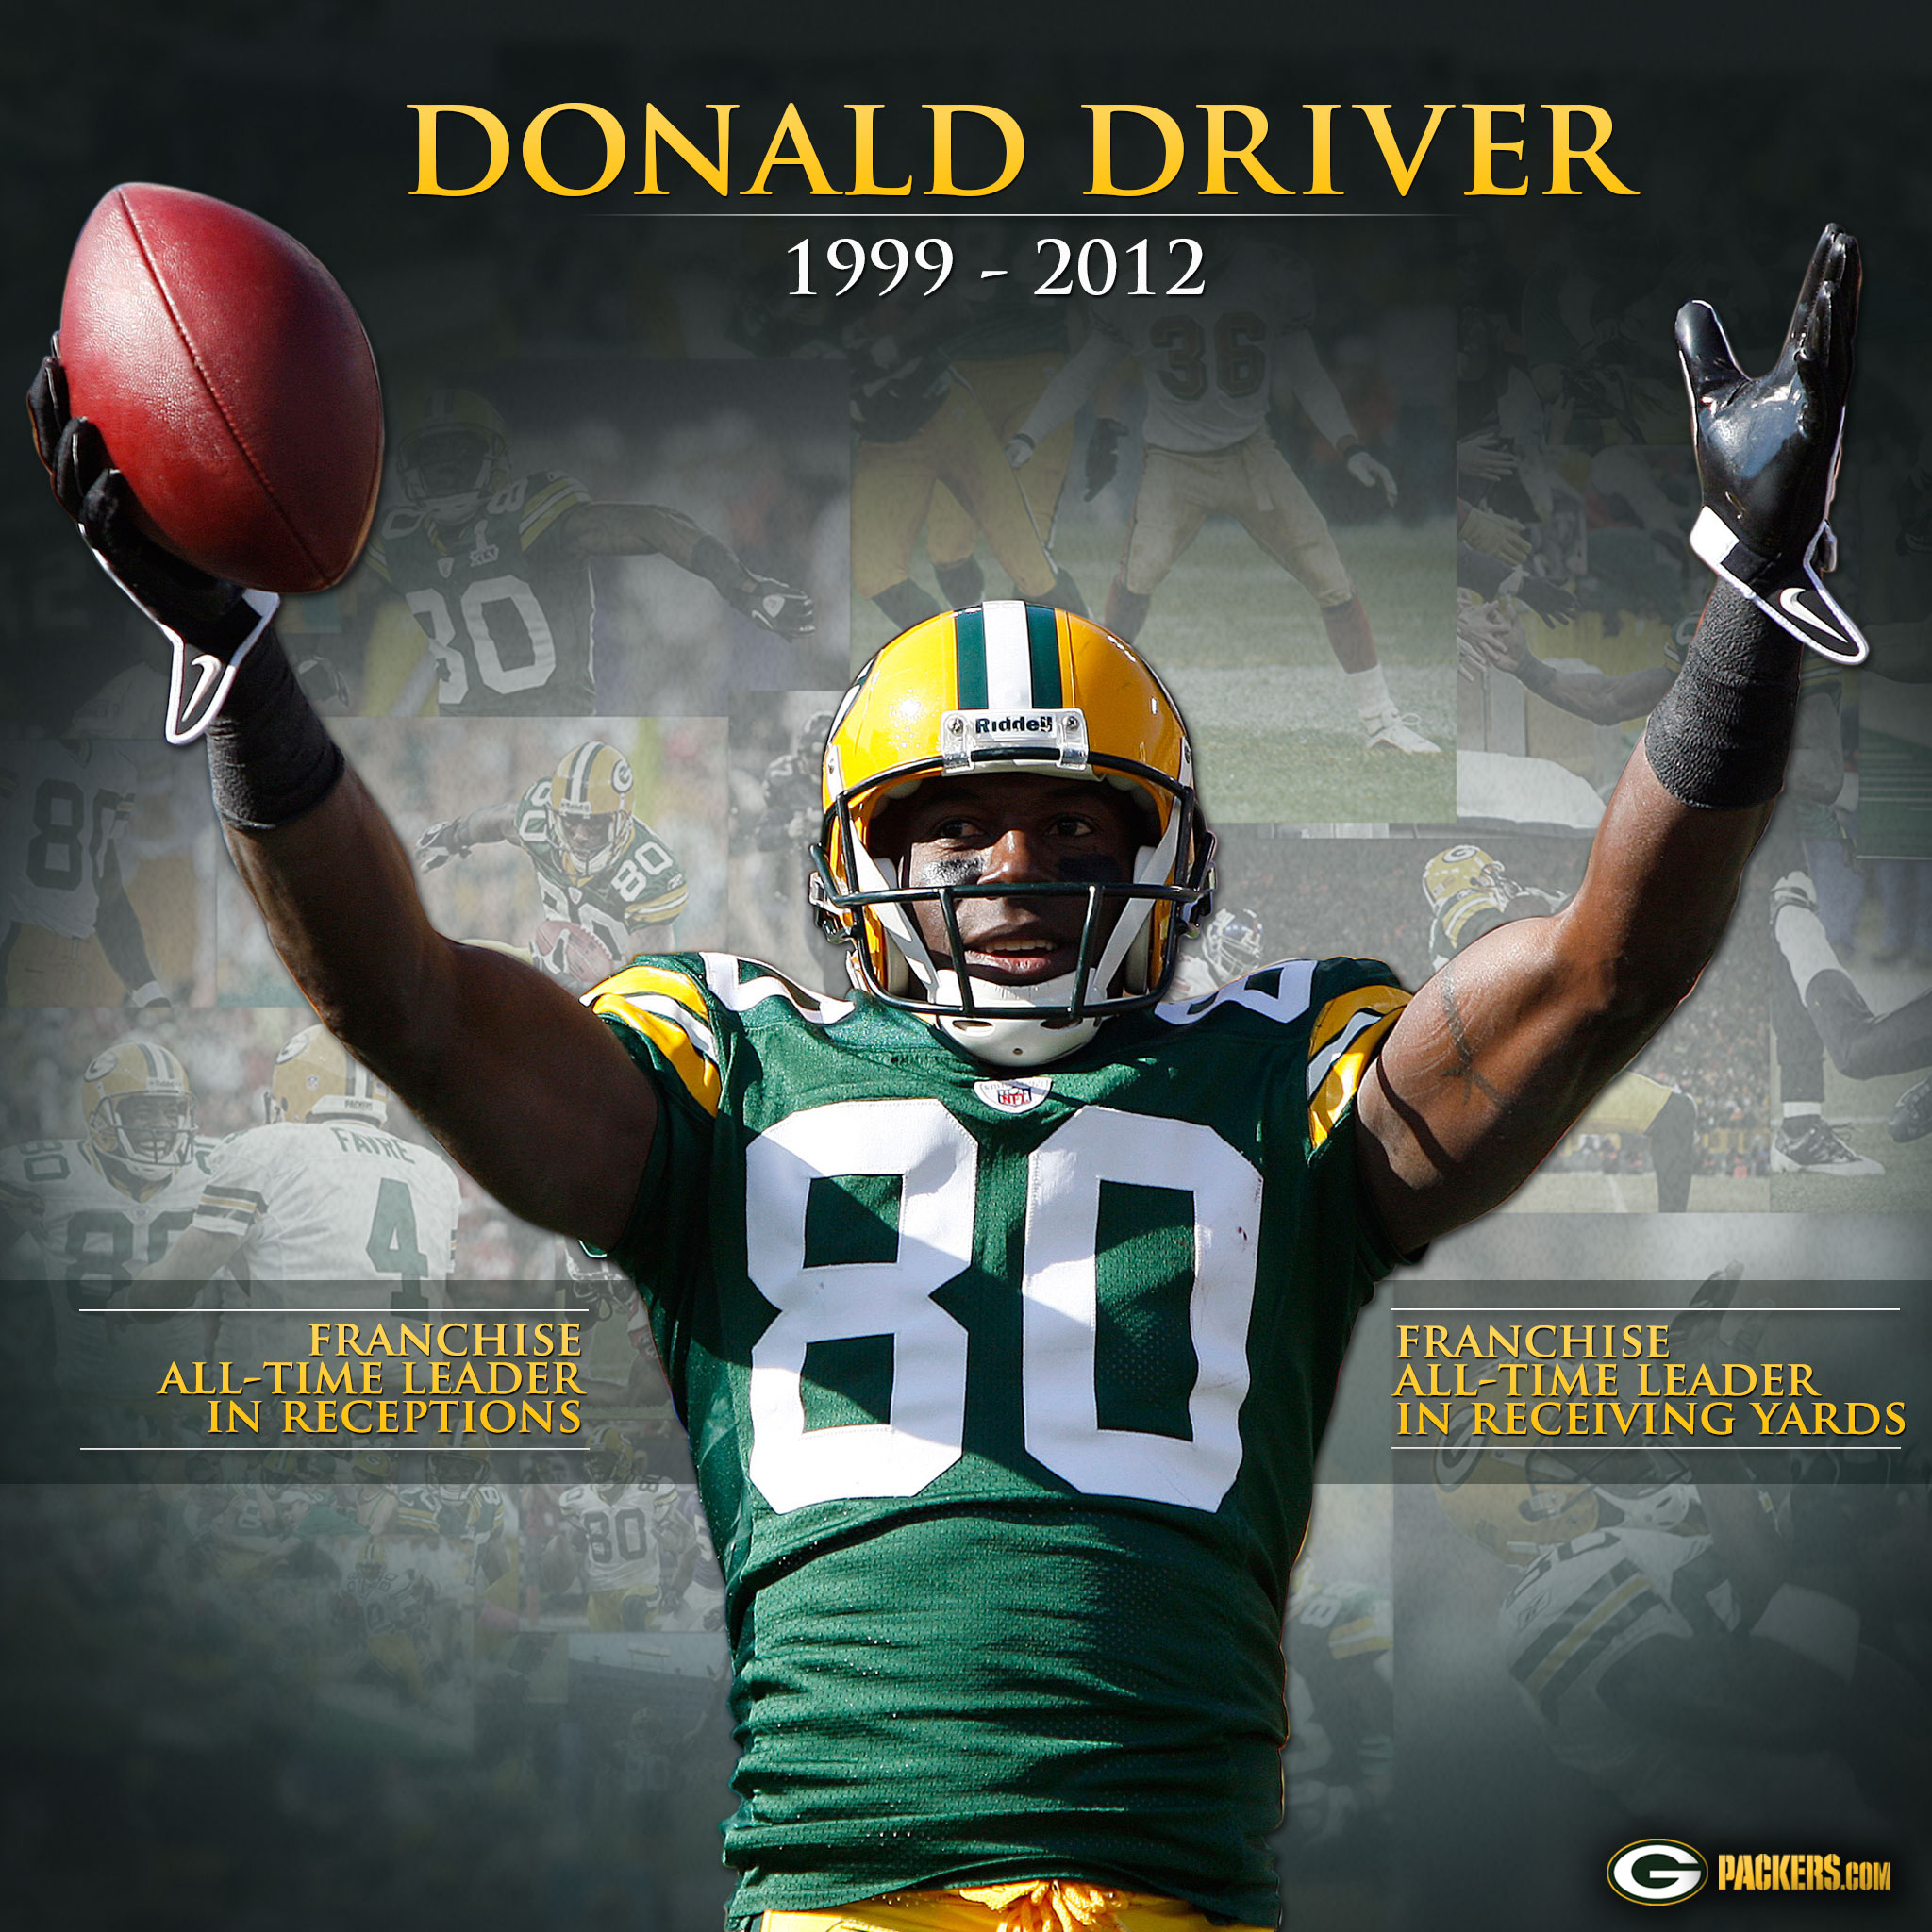 Packers.com | Donald Driver